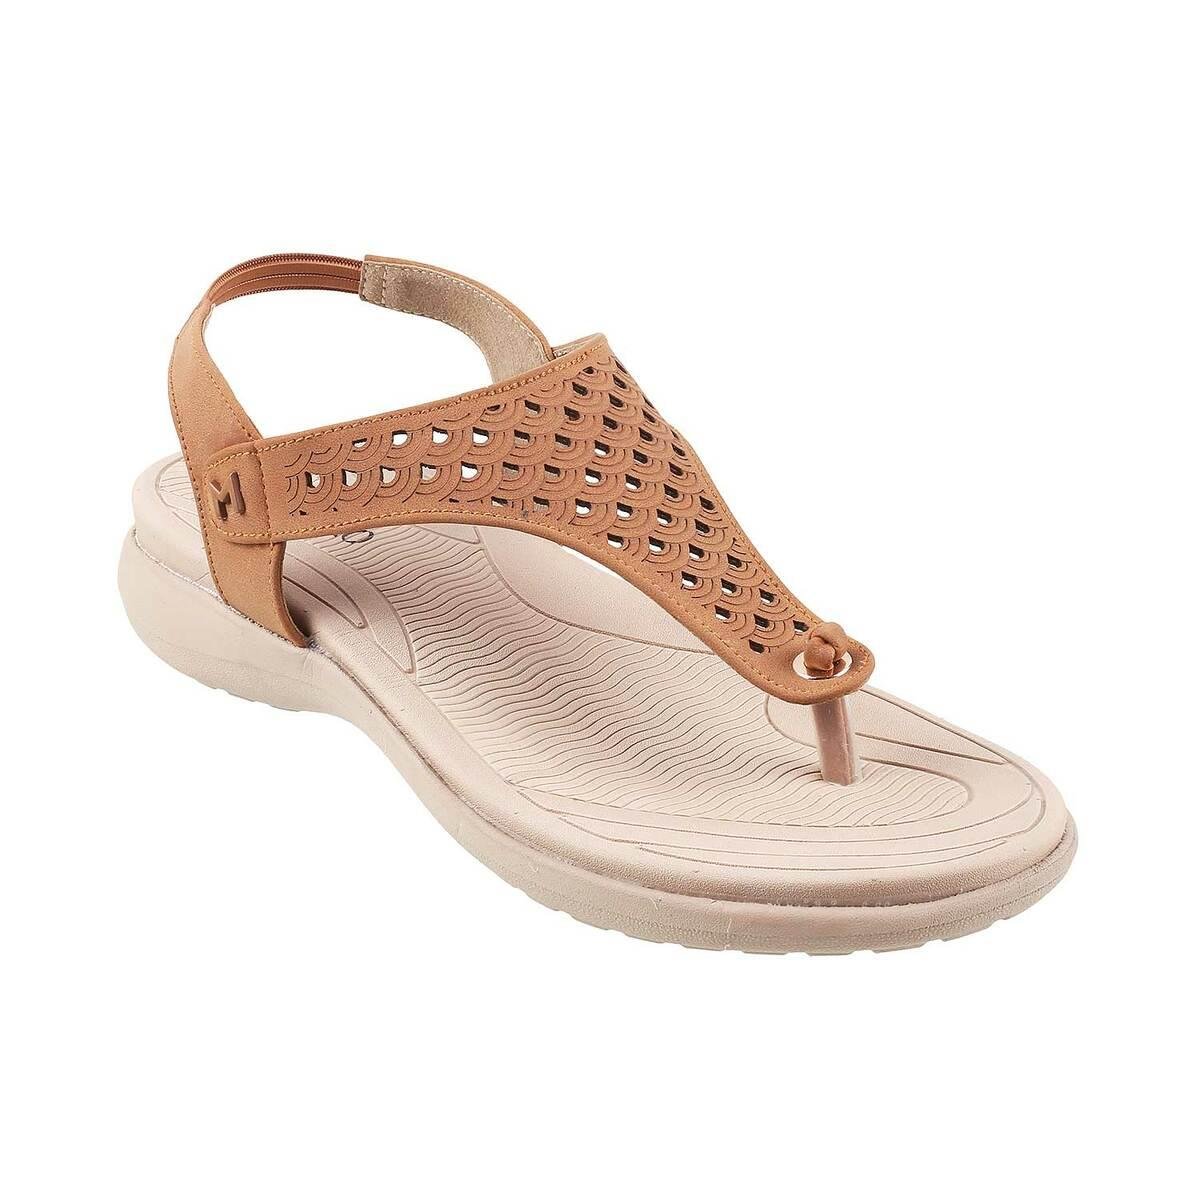 Buy Girls Gold Casual Sandals Online | SKU: 57-5016-52-30-Metro Shoes